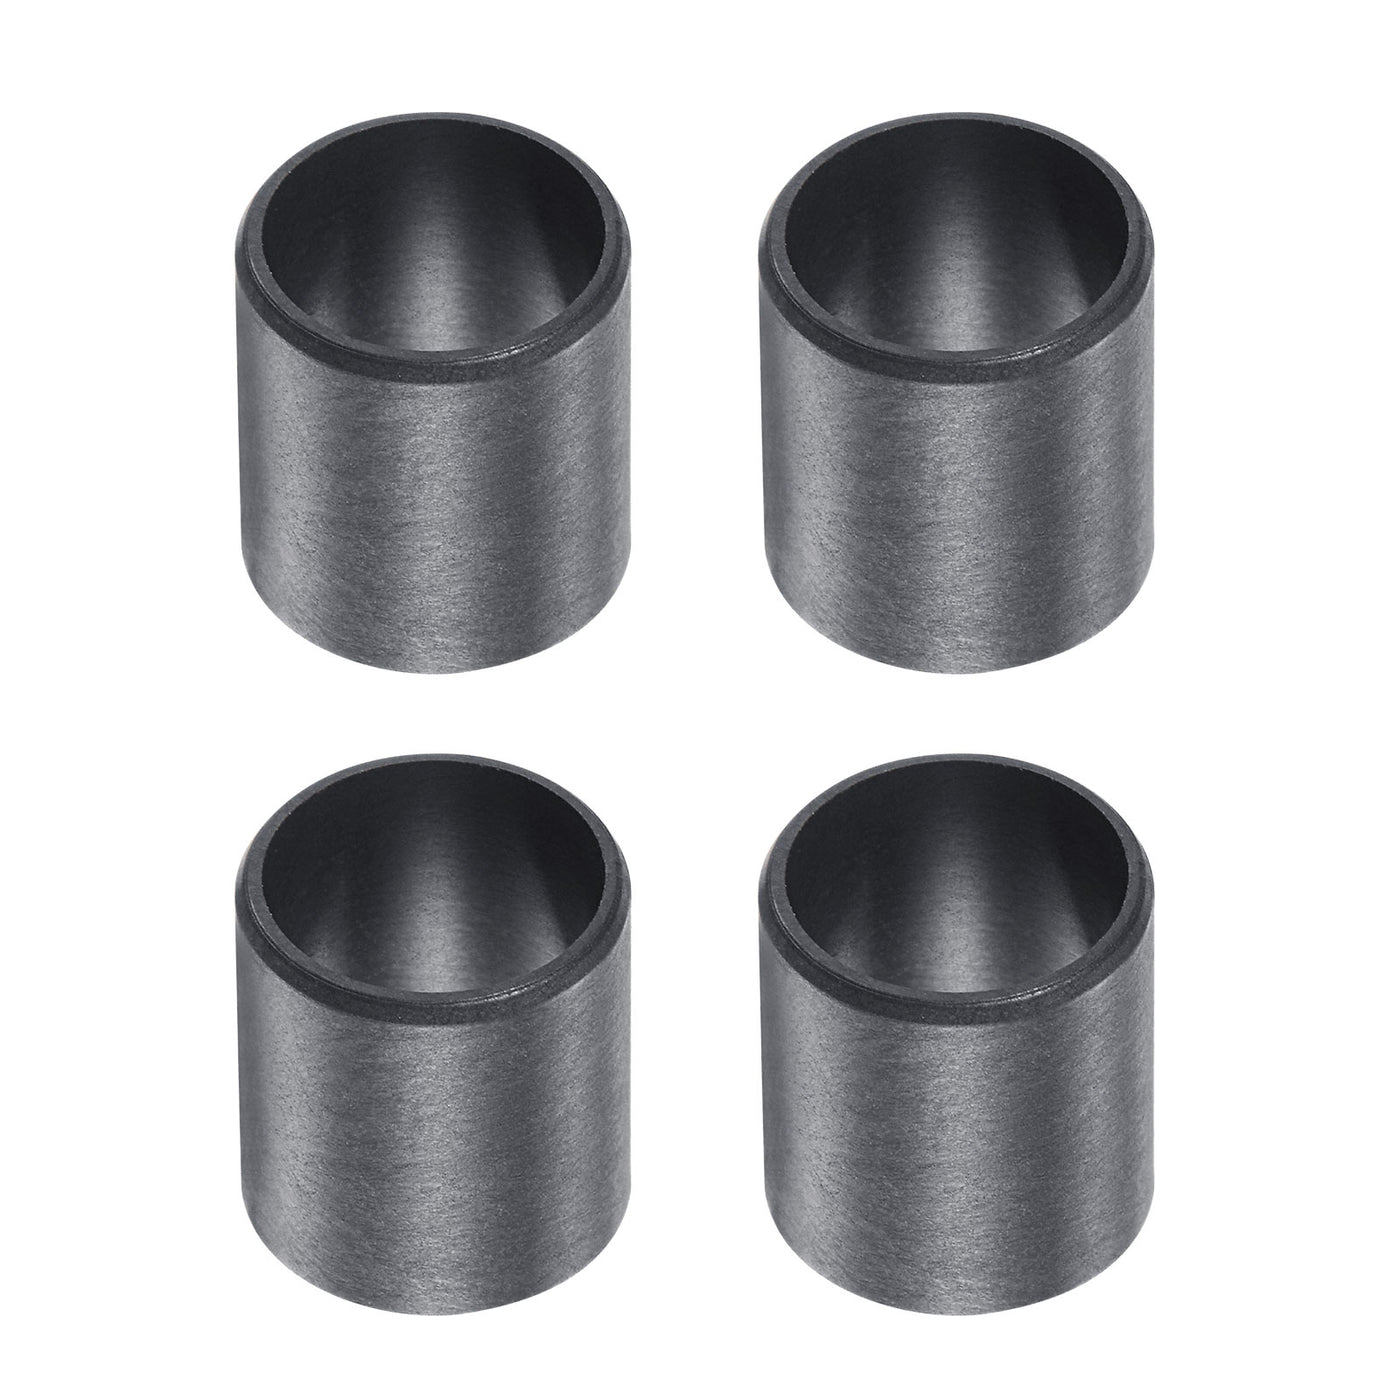 uxcell Uxcell Sleeve Bearings 12mmx14mmx15mm POM Wrapped Oilless Bushings Black 4pcs